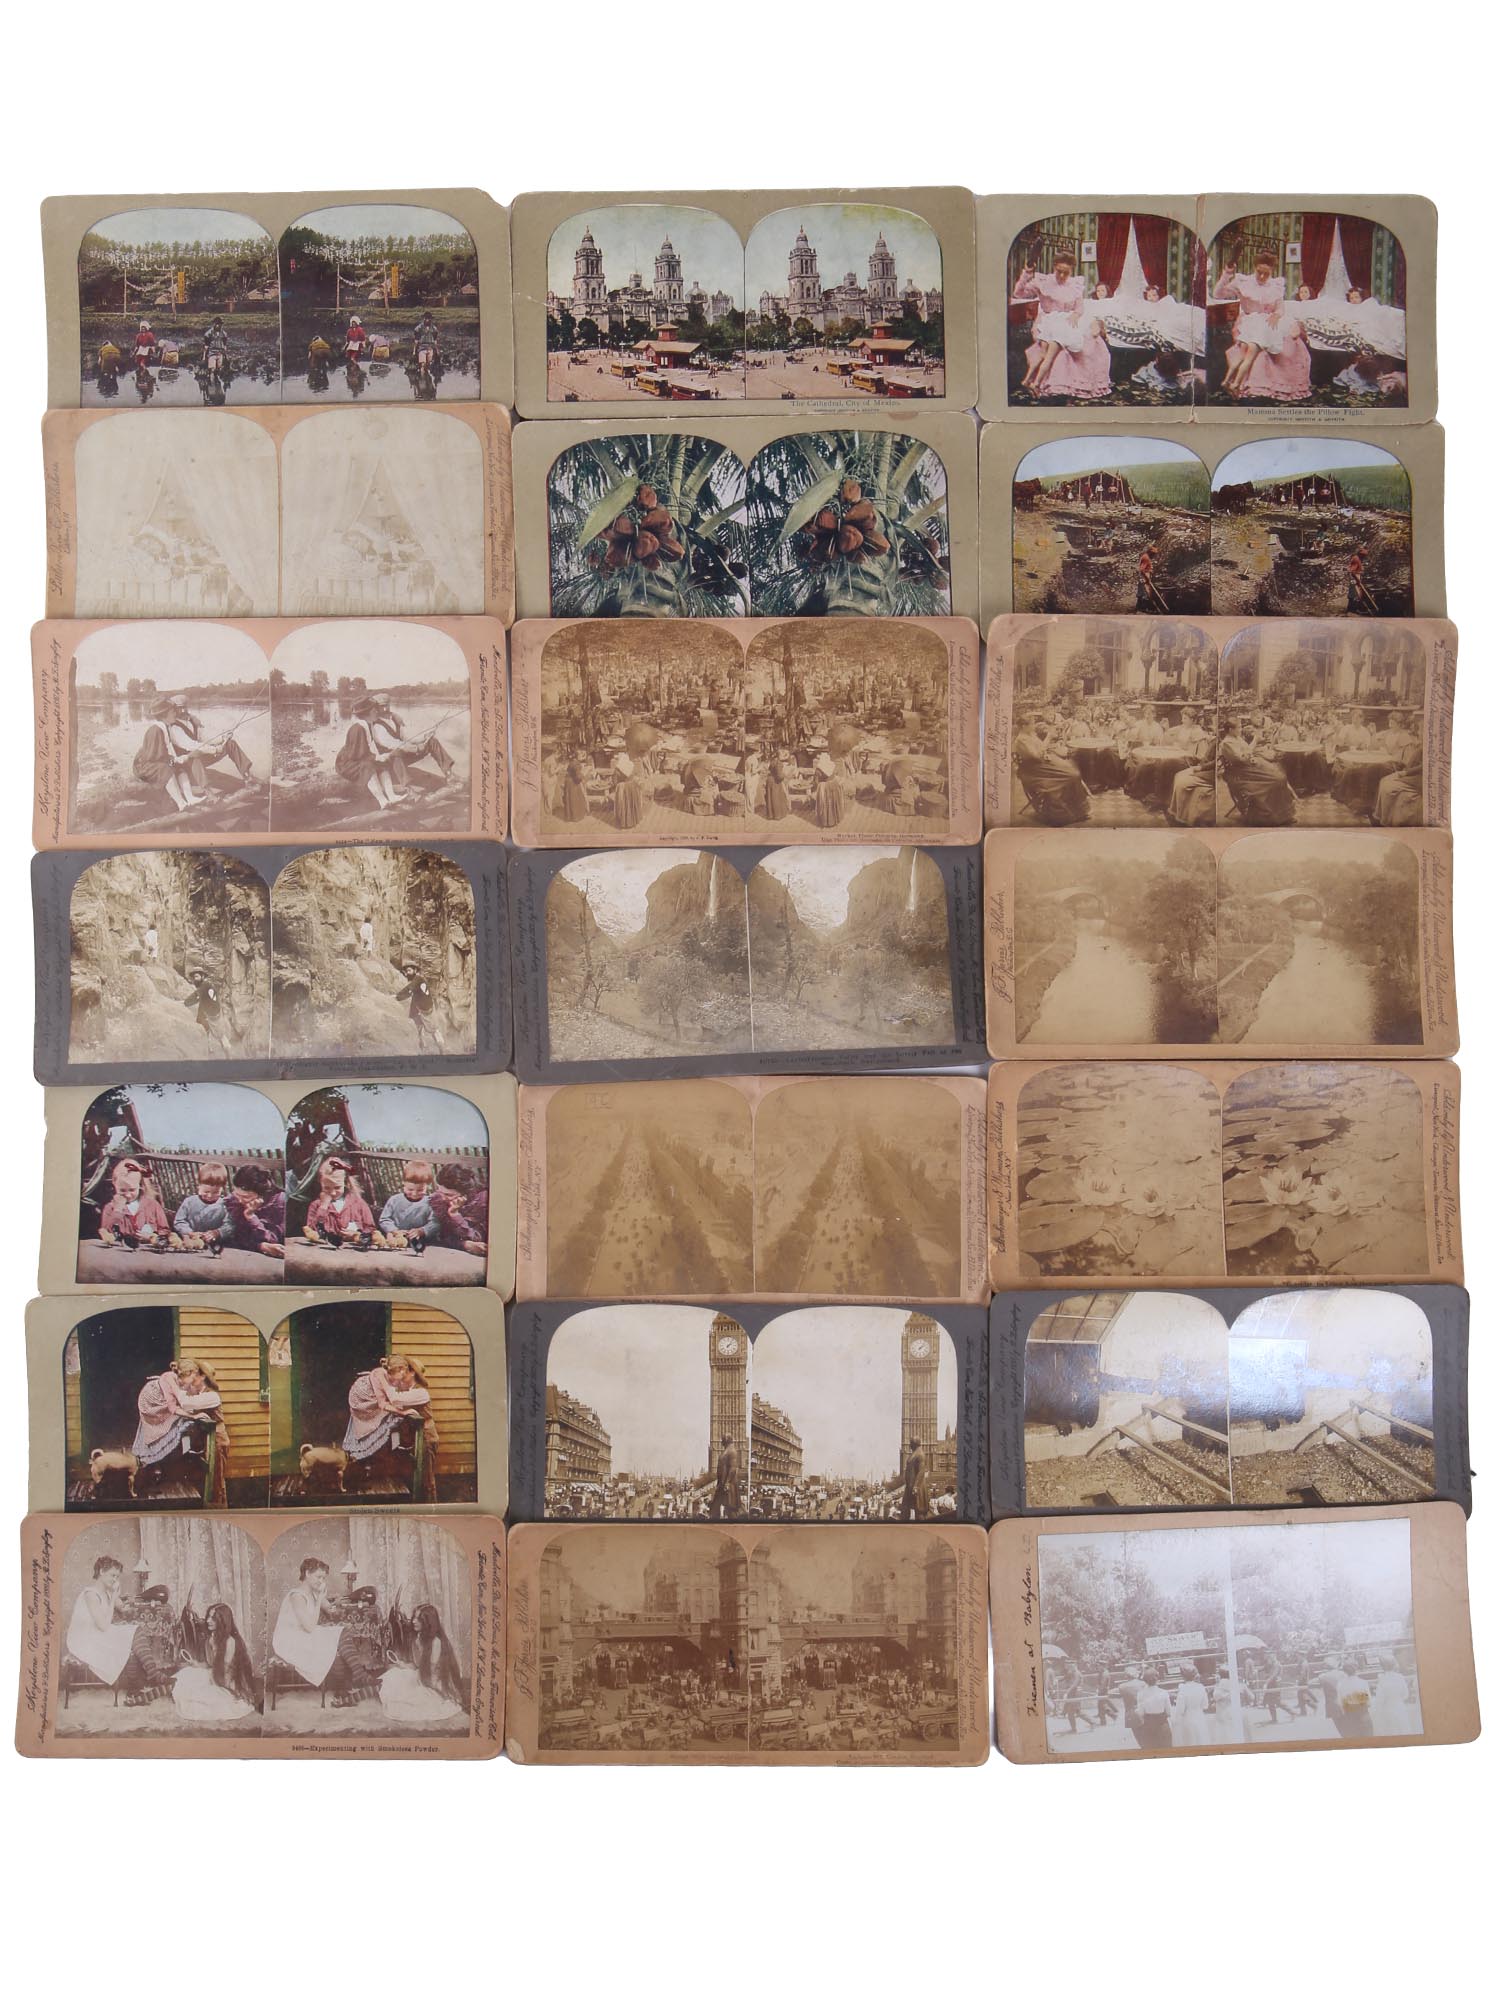 ANTIQUE KEYSTONE VIEW COMPANY STEREOSCOPE CARDS PIC-2